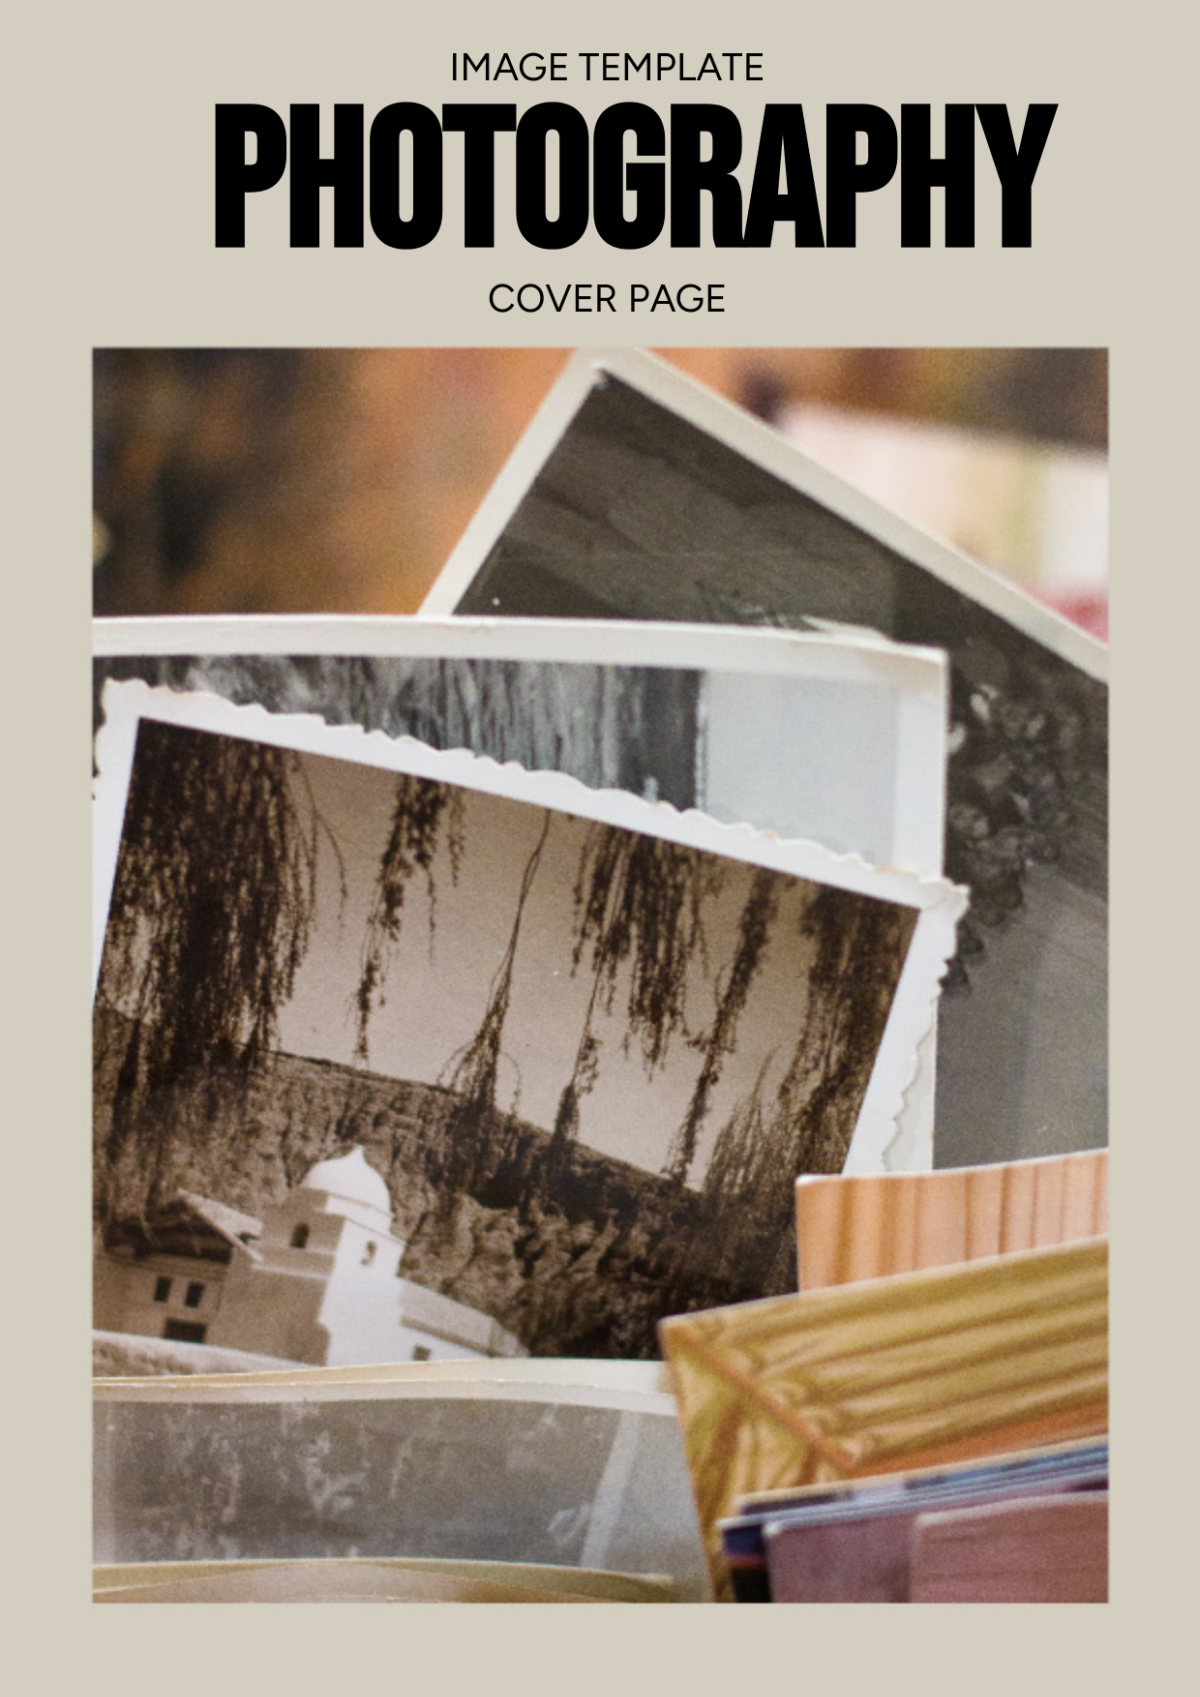 Photography Cover Page Image Template